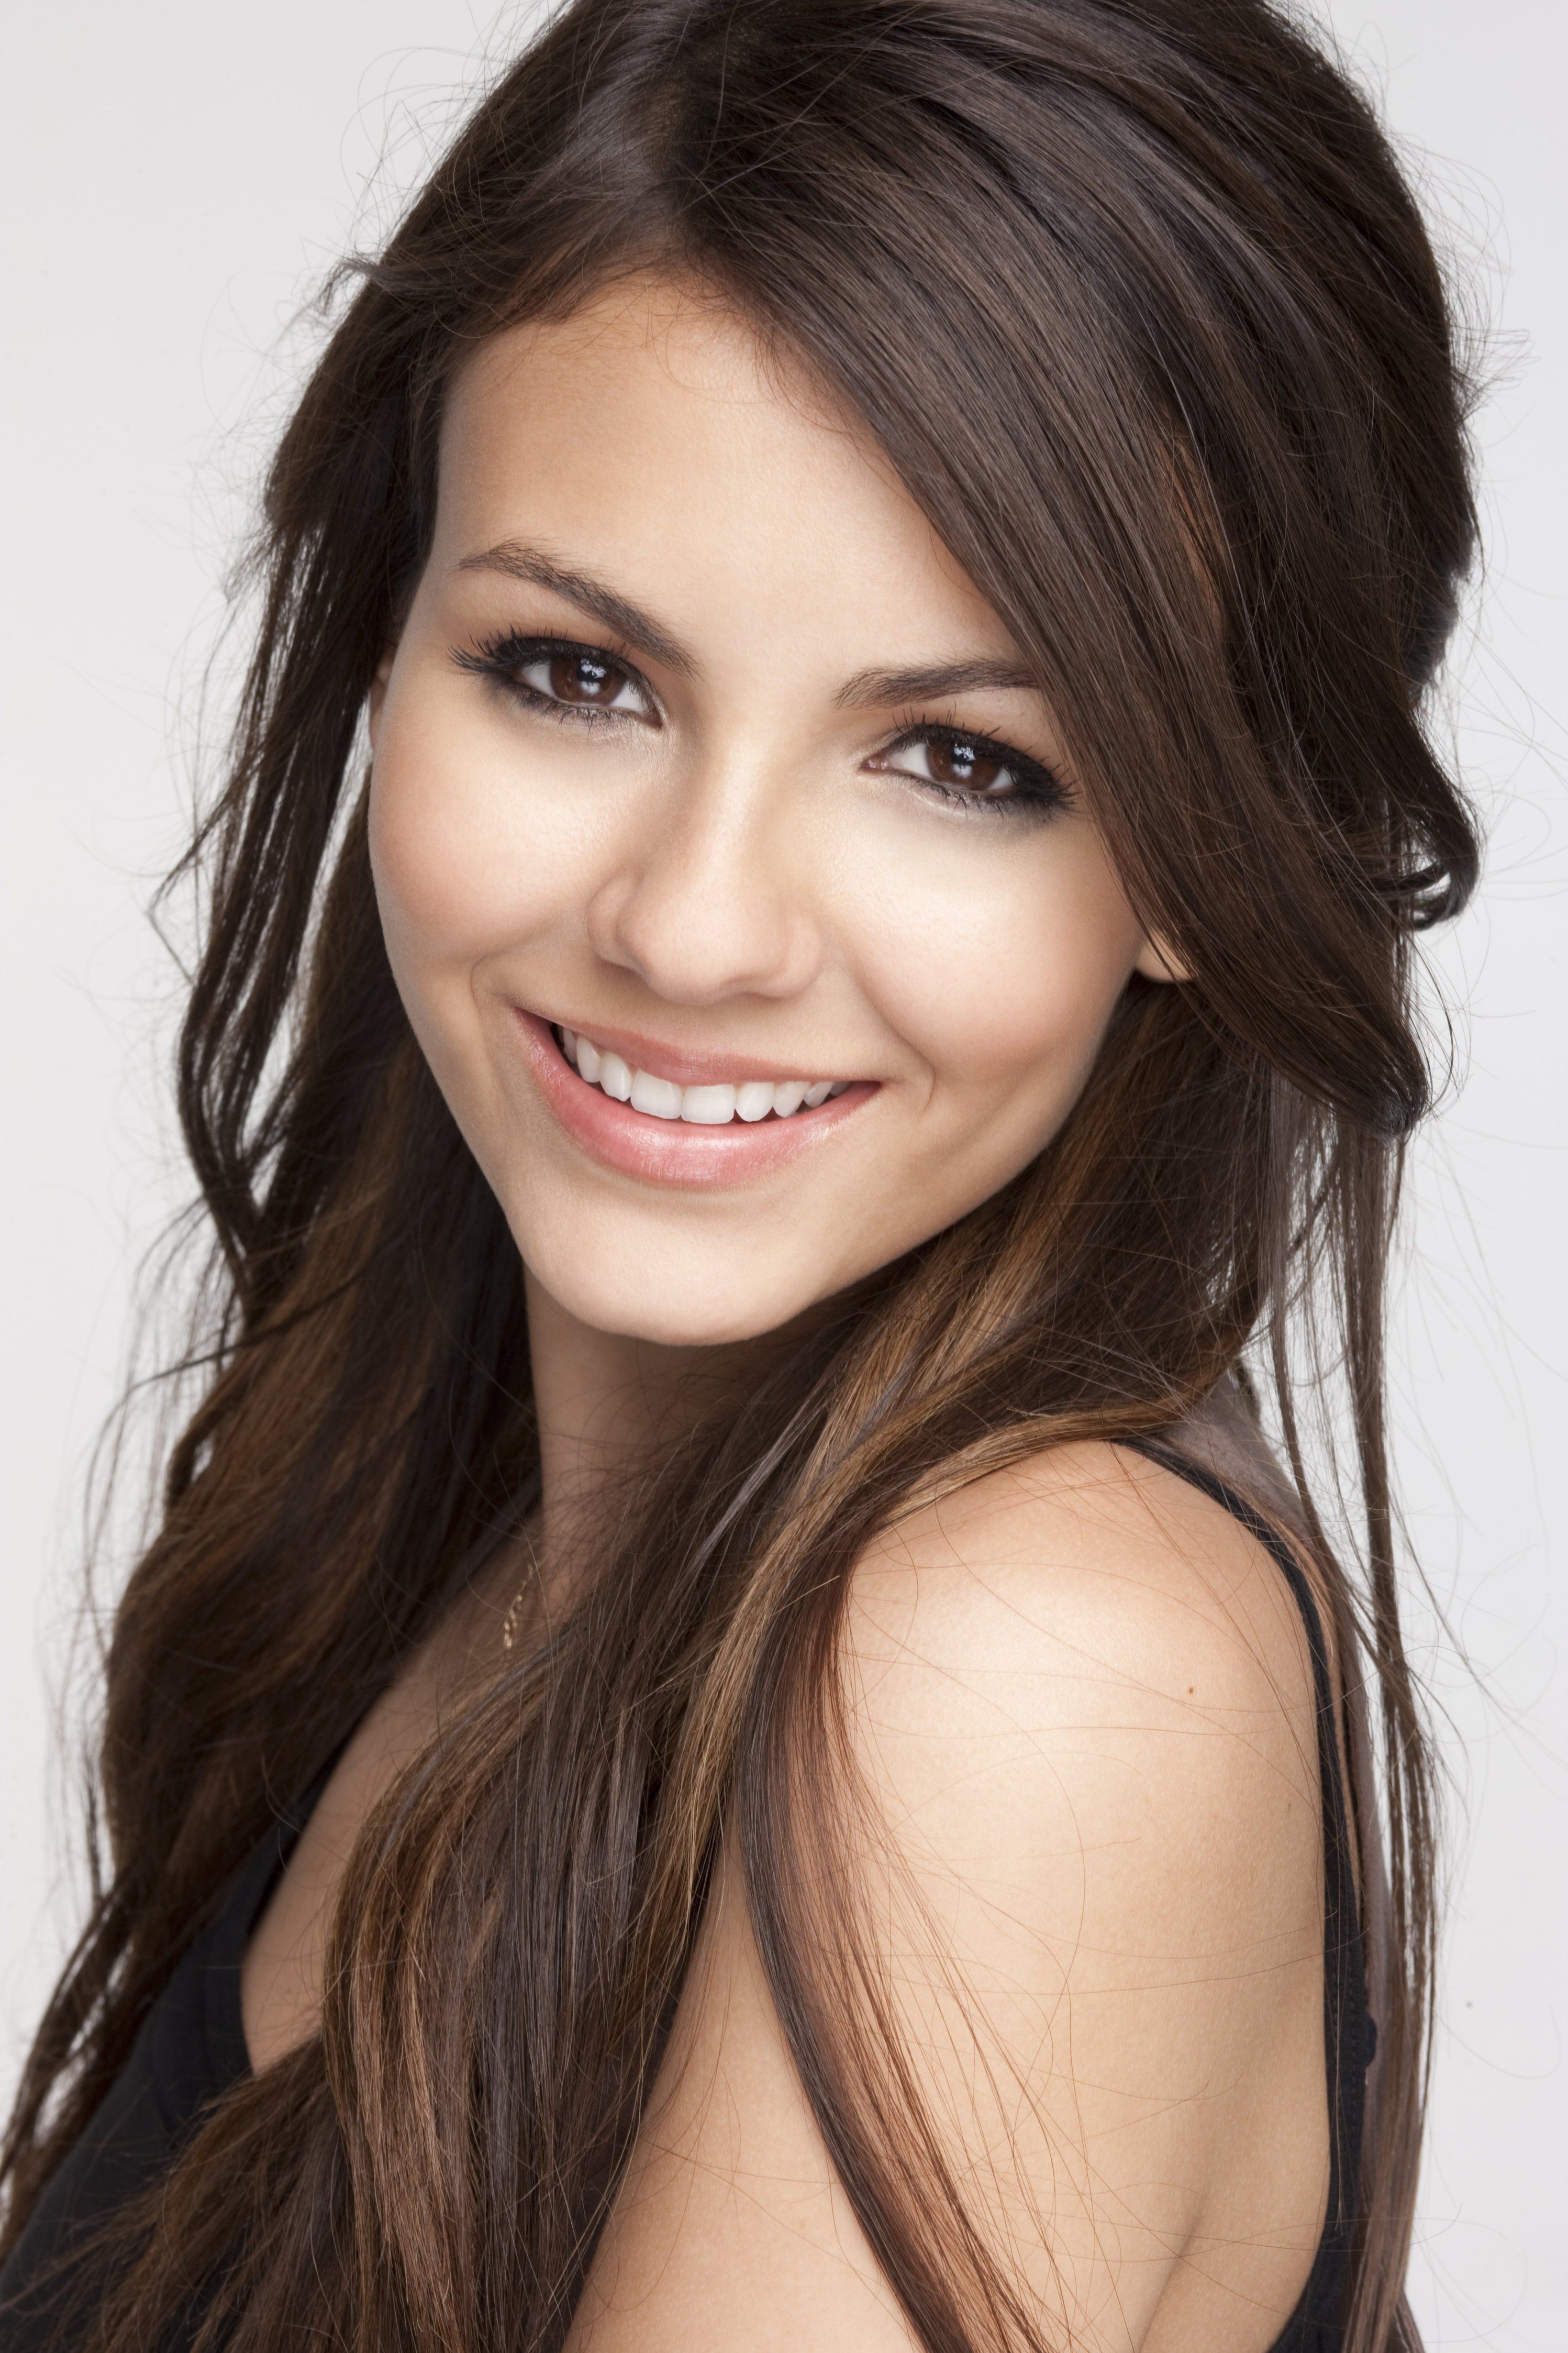 10+ images about Victoria justice on Pinterest | Ariana grande